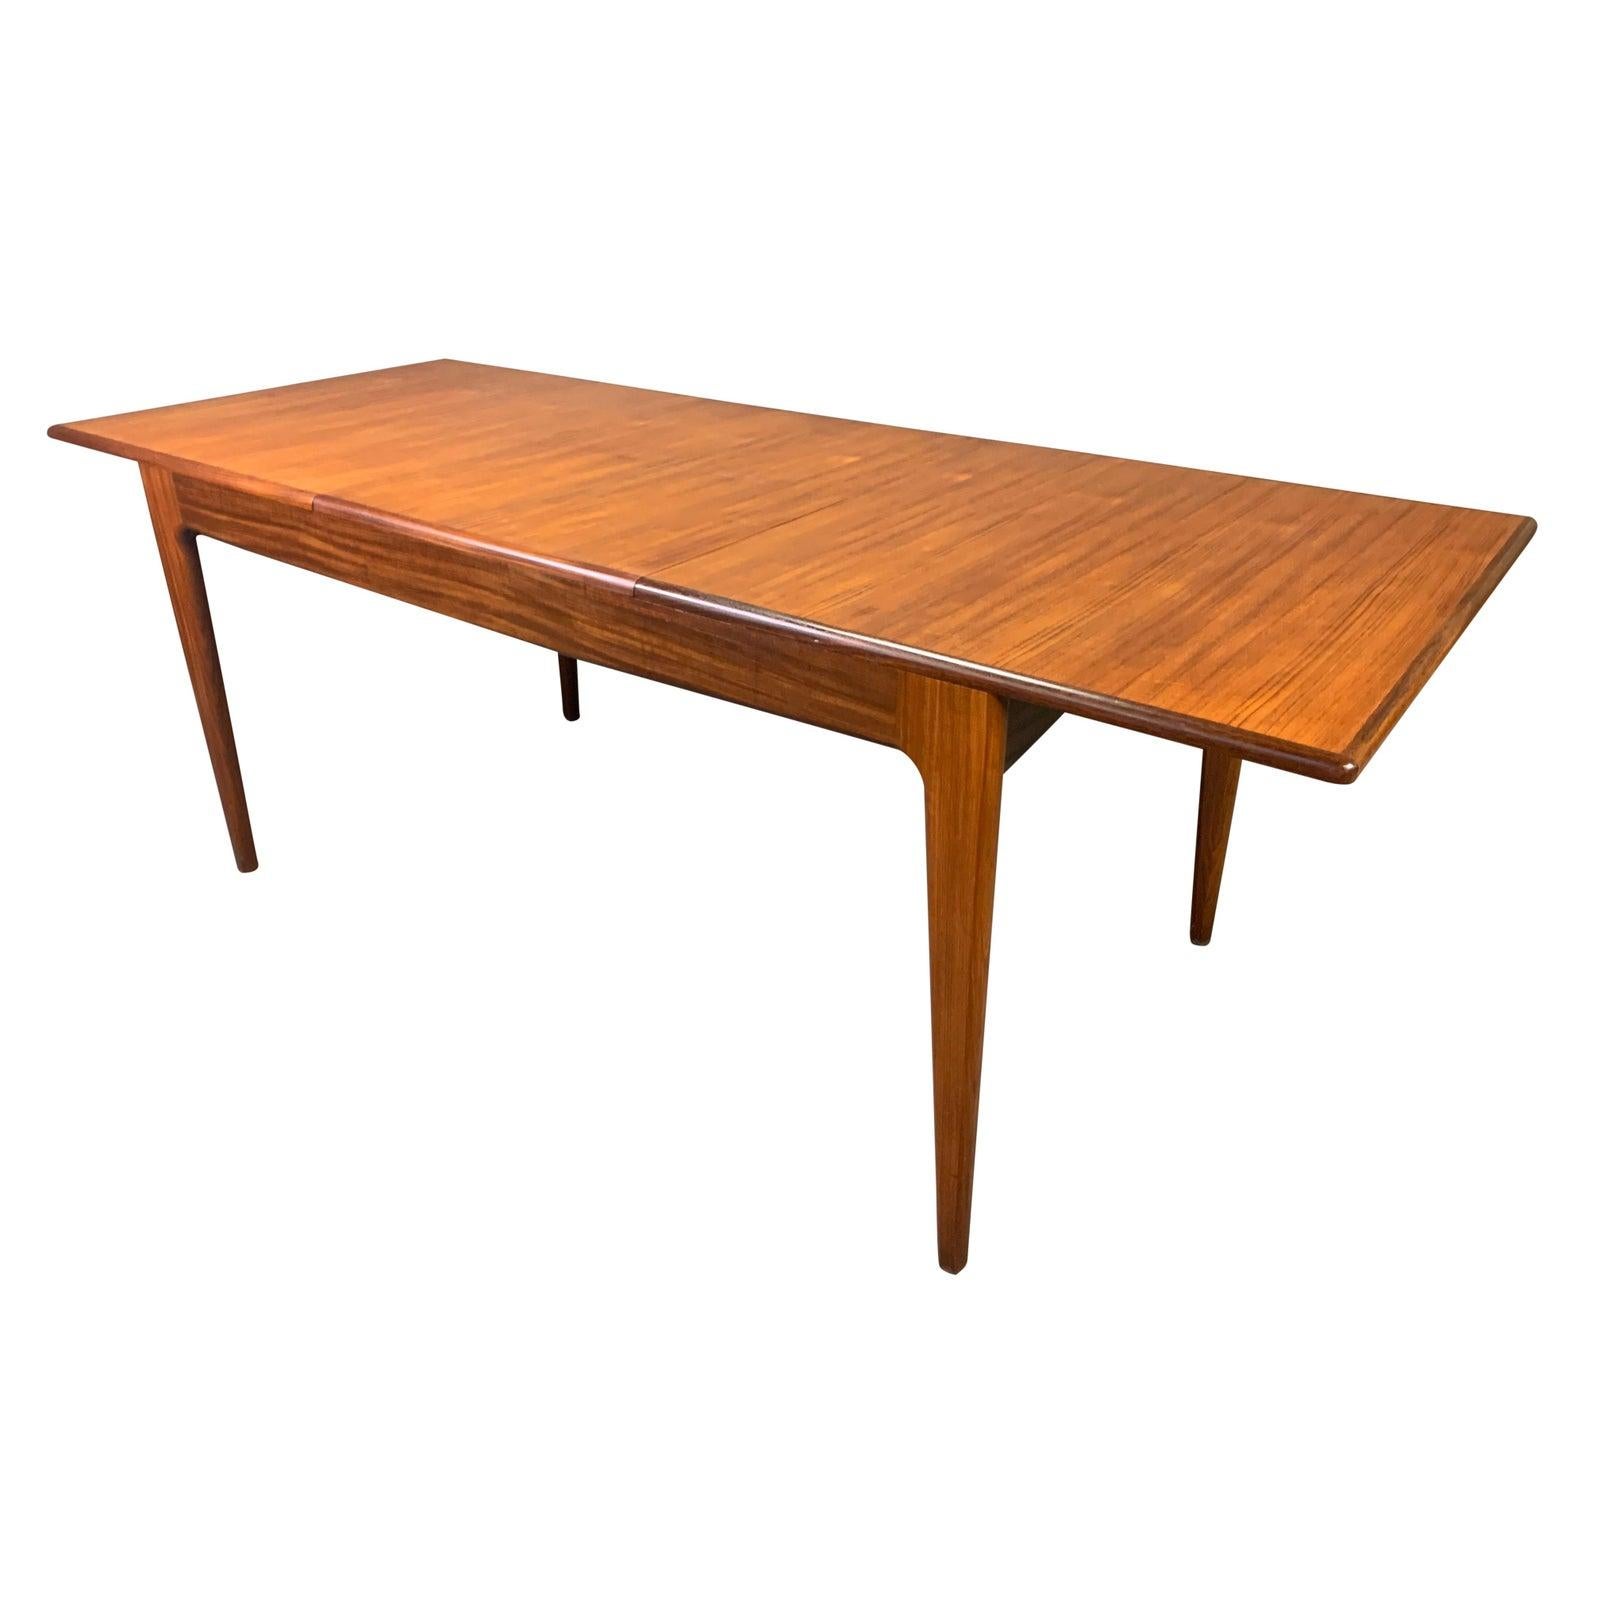 Vintage British Midcentury Teak Dining Table by John Herbert for A. Younger 1